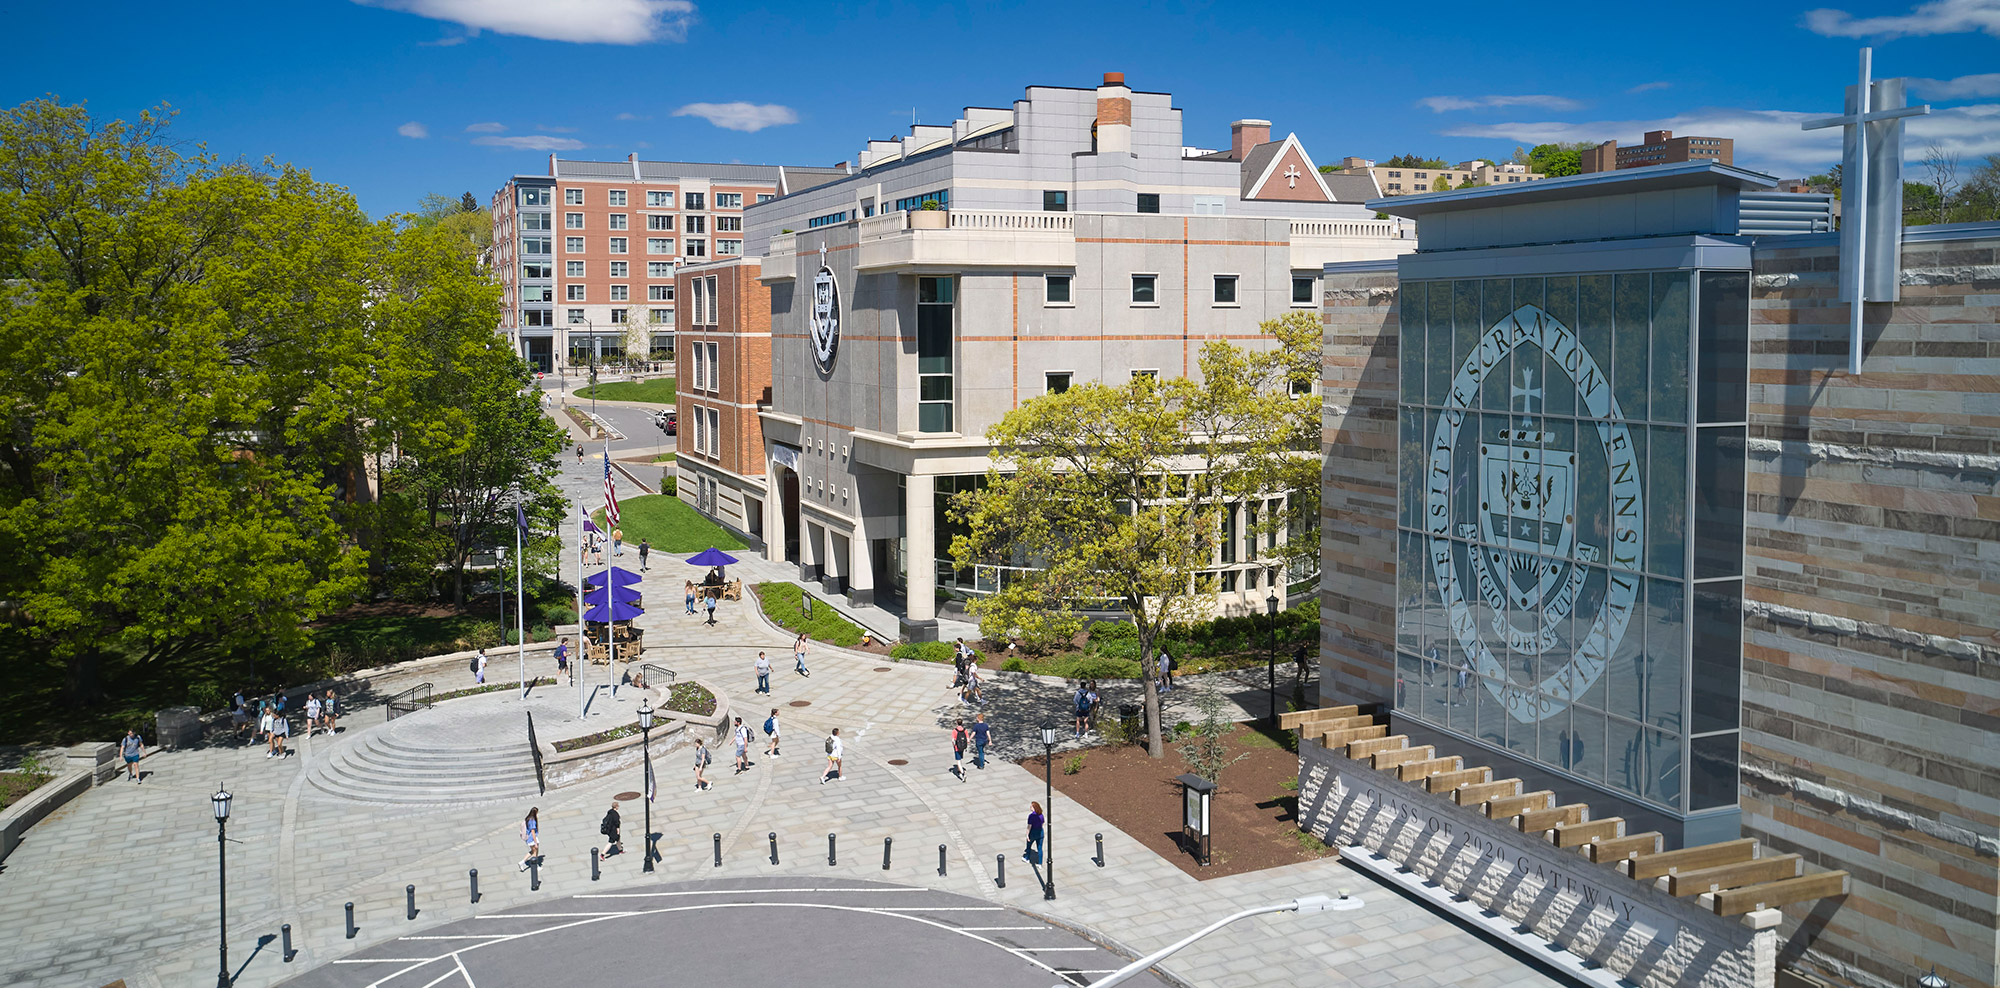 Bird’s-eye view of the library and the gateway on The University of Scranton’s campus